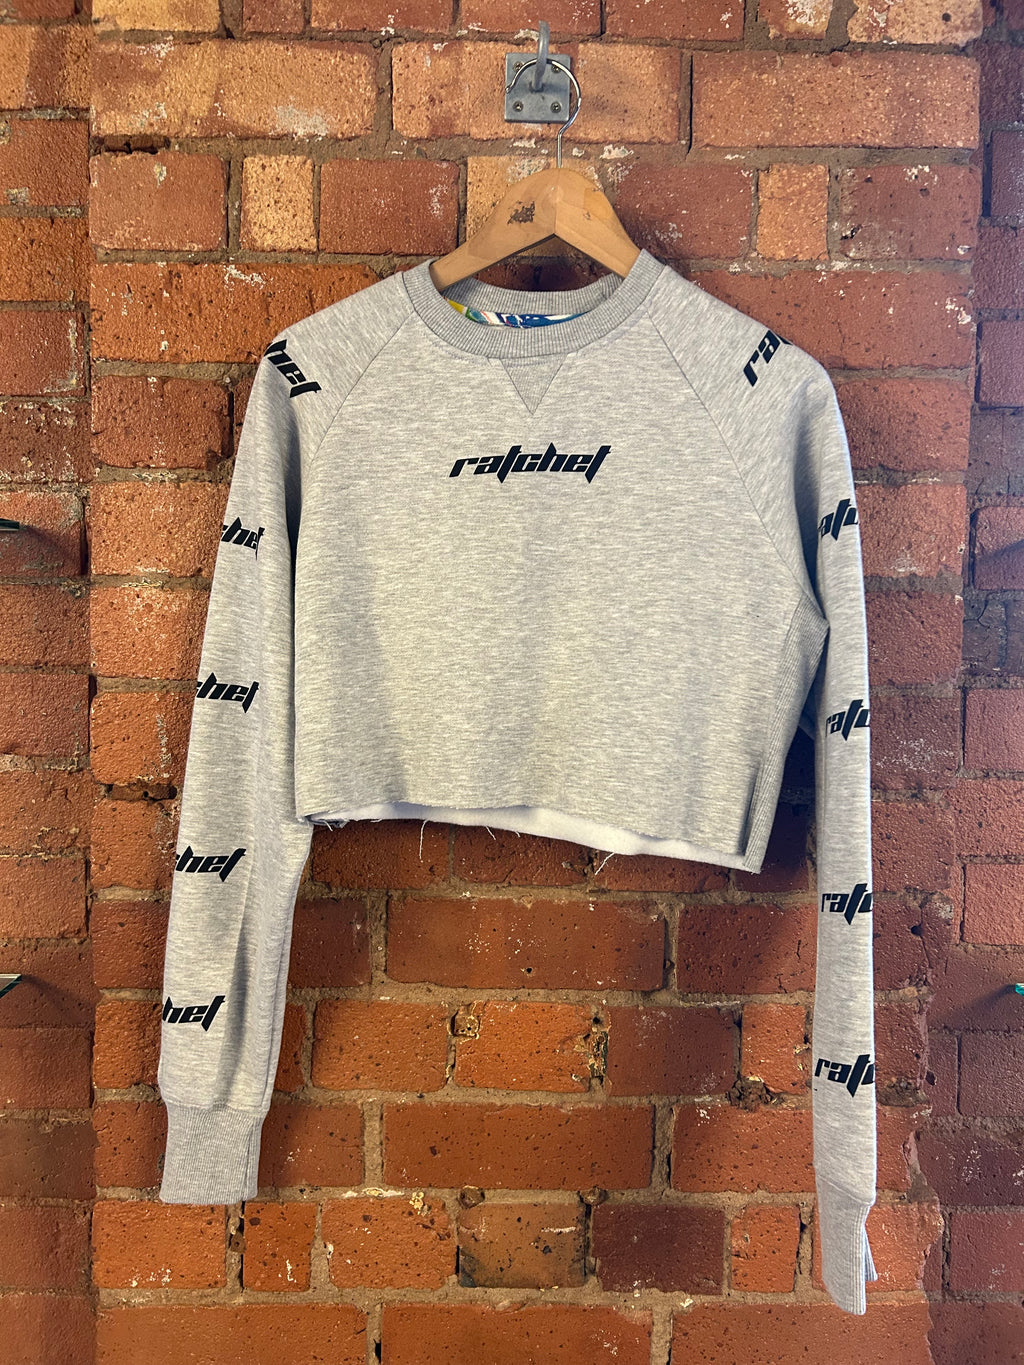 SALE Adult Small Grey Racer Repeat Cropped Sweatshirt